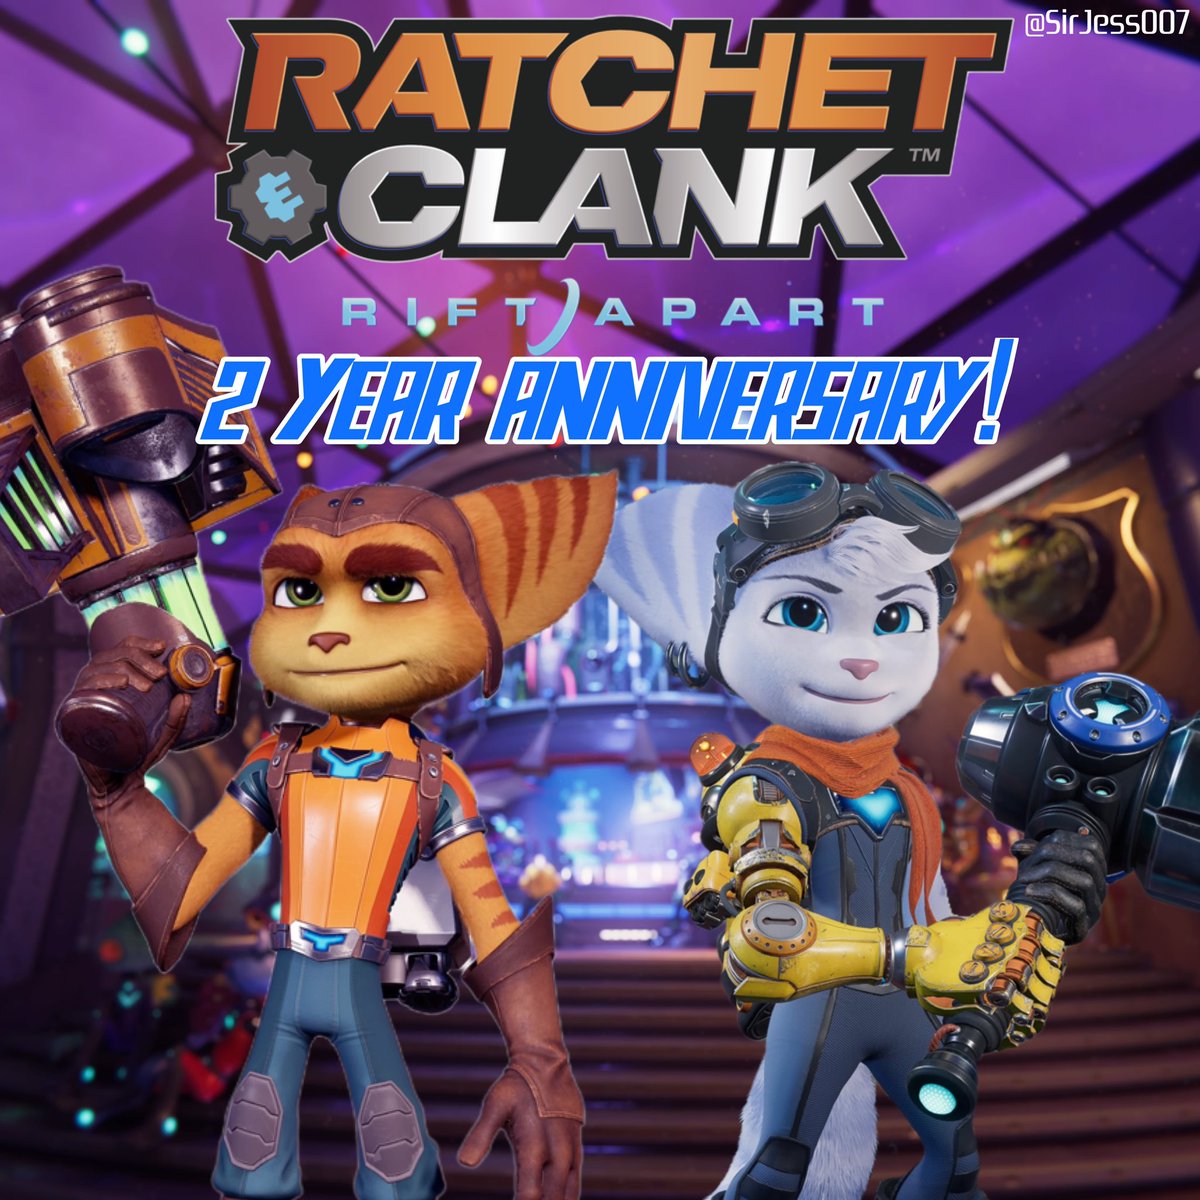 Happy 2nd Anniversary to @insomniacgames’ best game of the last decade and the best PS5 game of this generation!
🎉🛠️💥
#Ratchet #Rivet #RatchetandClank #RiftApart #RatchetandClankRiftApart #RatchetClankRiftApart #RatchetPS5 #Ratchet20 #InsomGamesSpotlight #InsomGamesCommunity